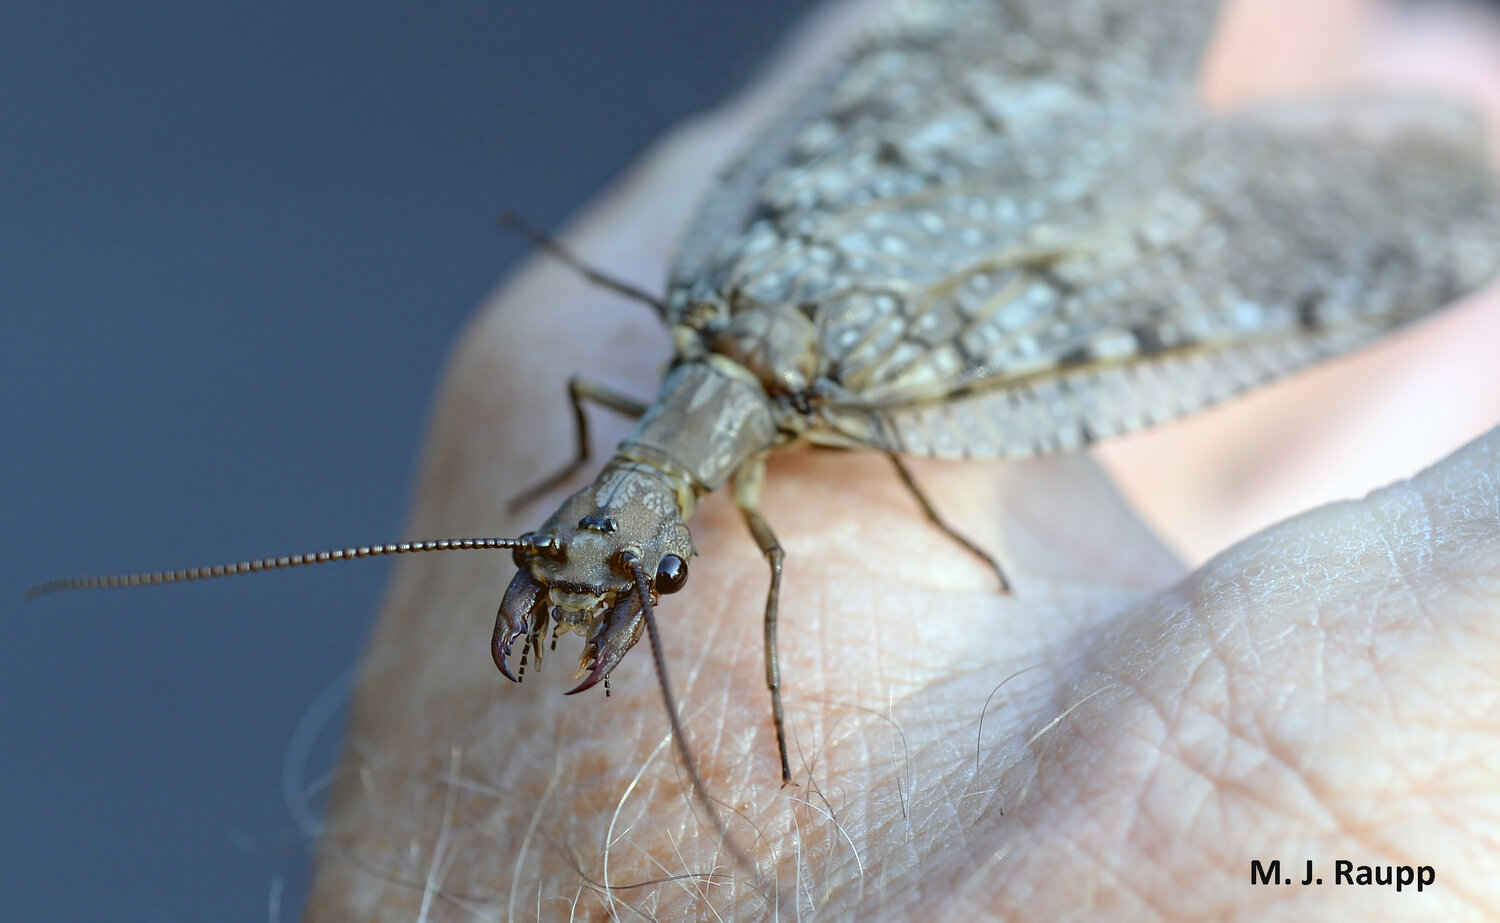 How a cool creepy insect warms up: Eastern Dobsonfly, Corydalus cornutus —  Bug of the Week